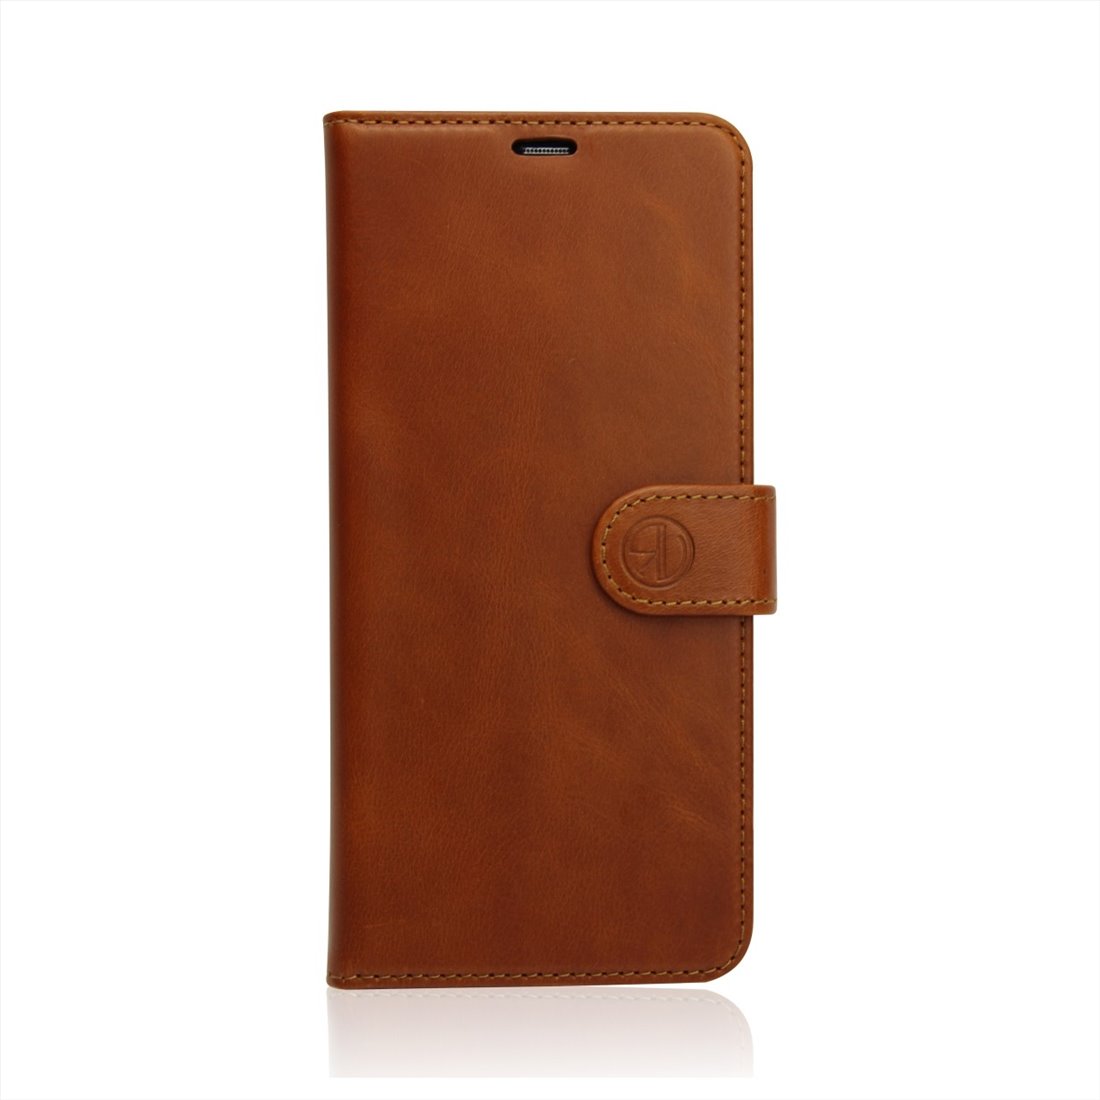 Apple iPhone 14 pro max Genuine Leather Light brown Book Case Smartphone Case